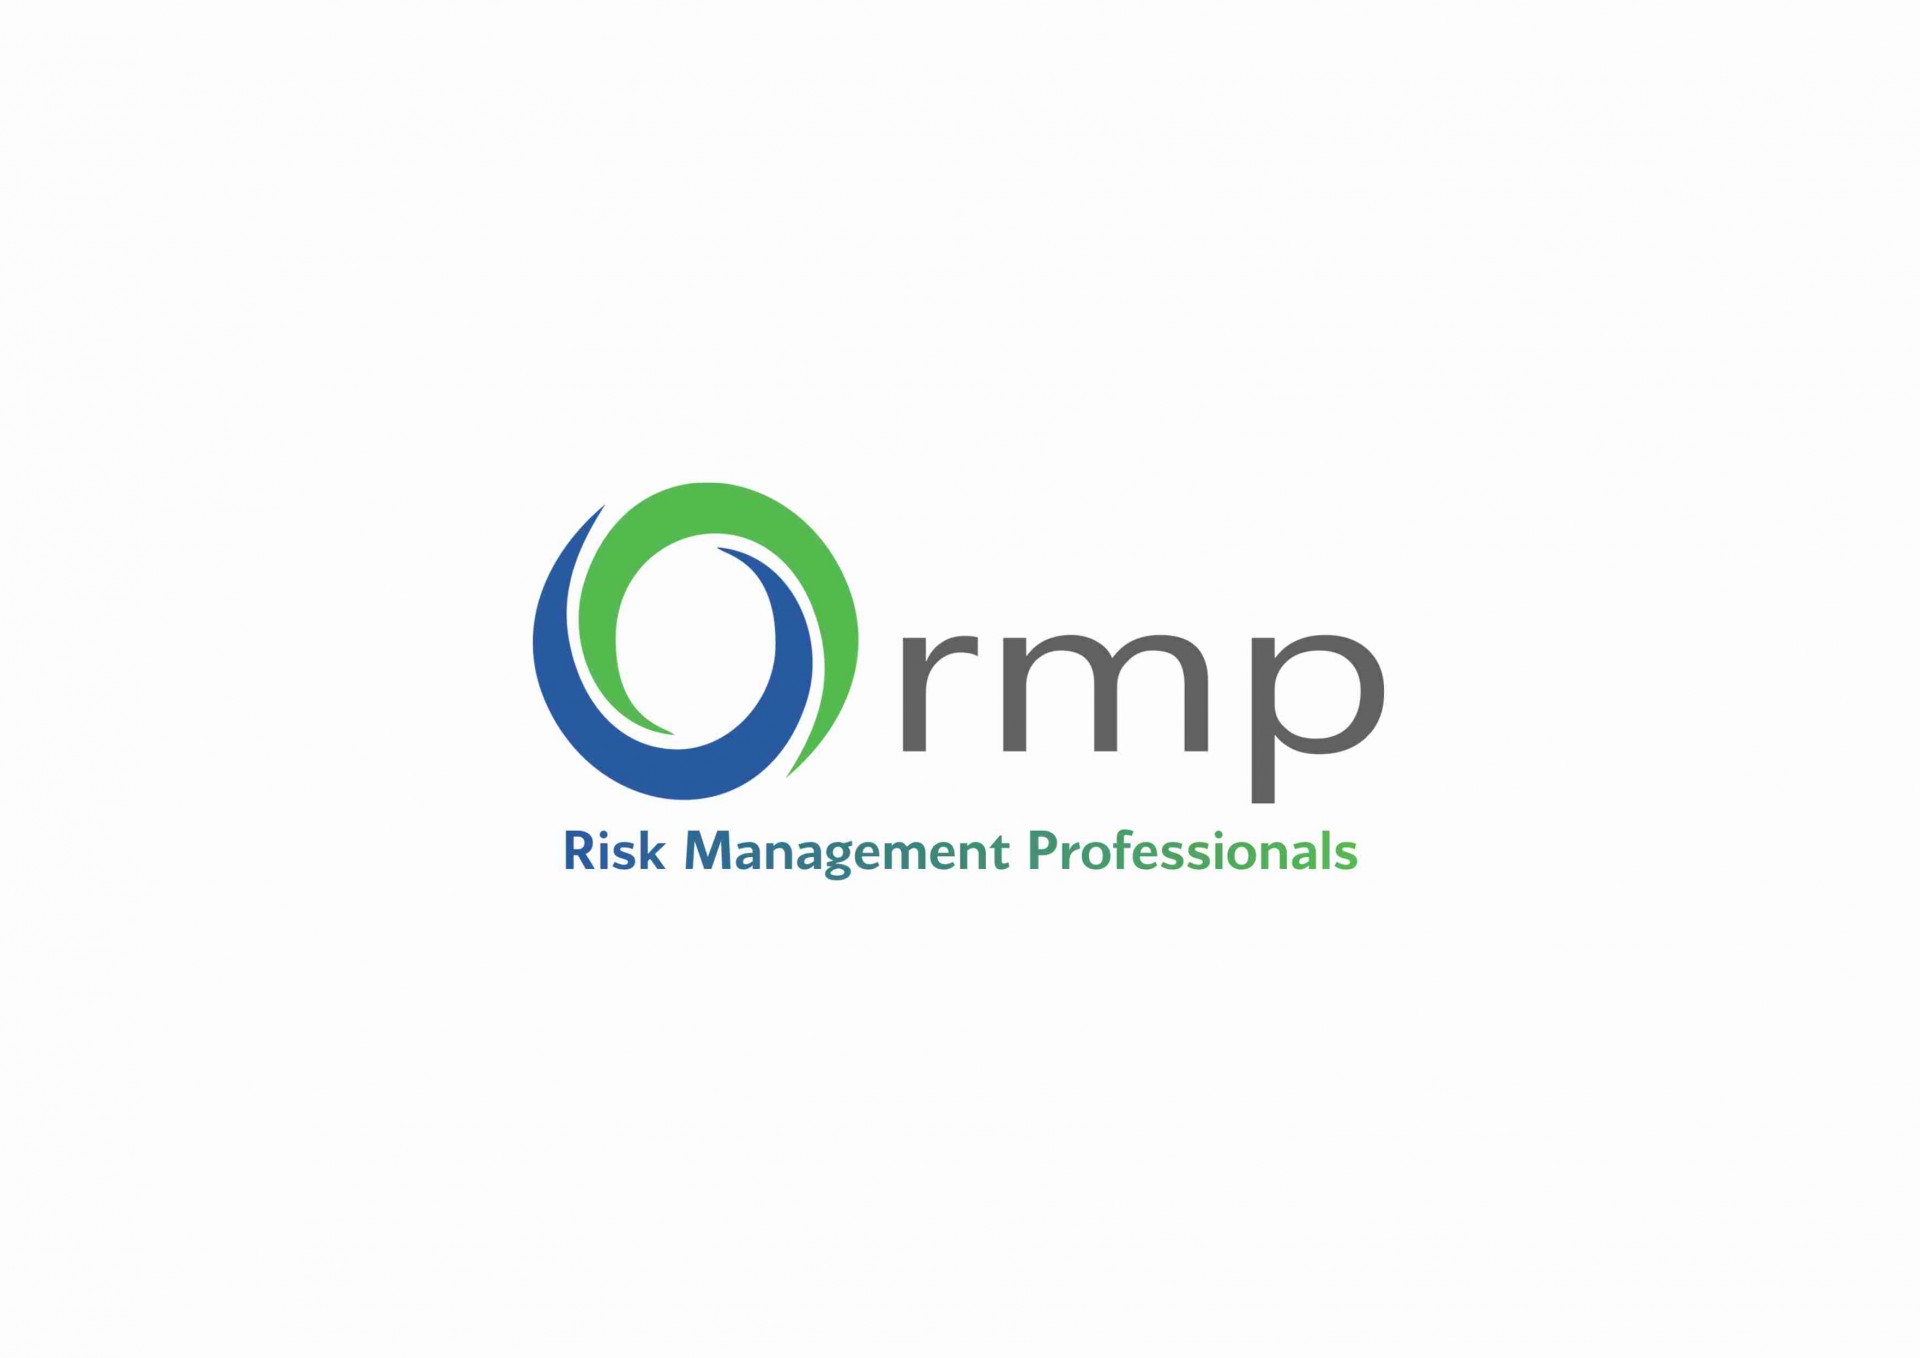 Our Partnership with "RMP"!